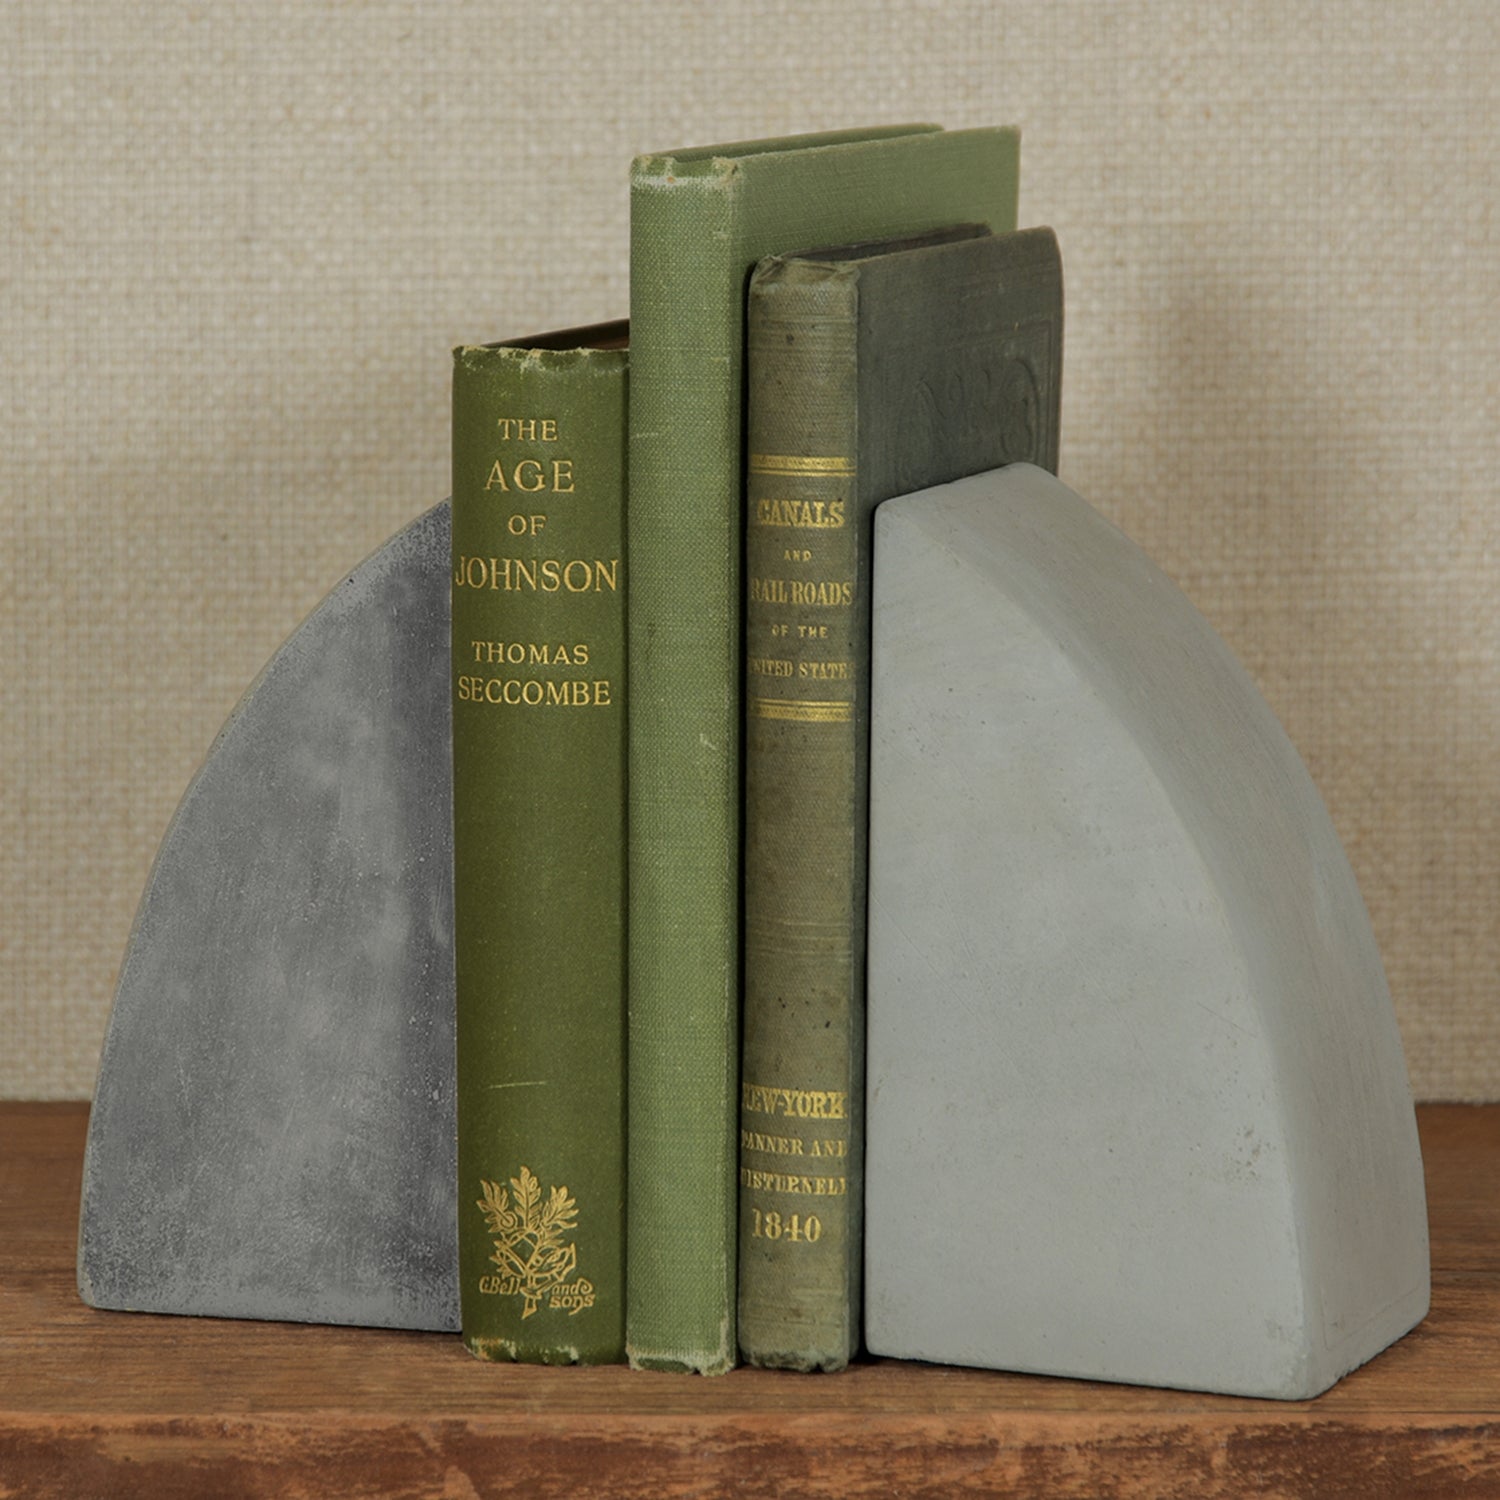 Cement Arch Bookends- 6.25x3.25x6"